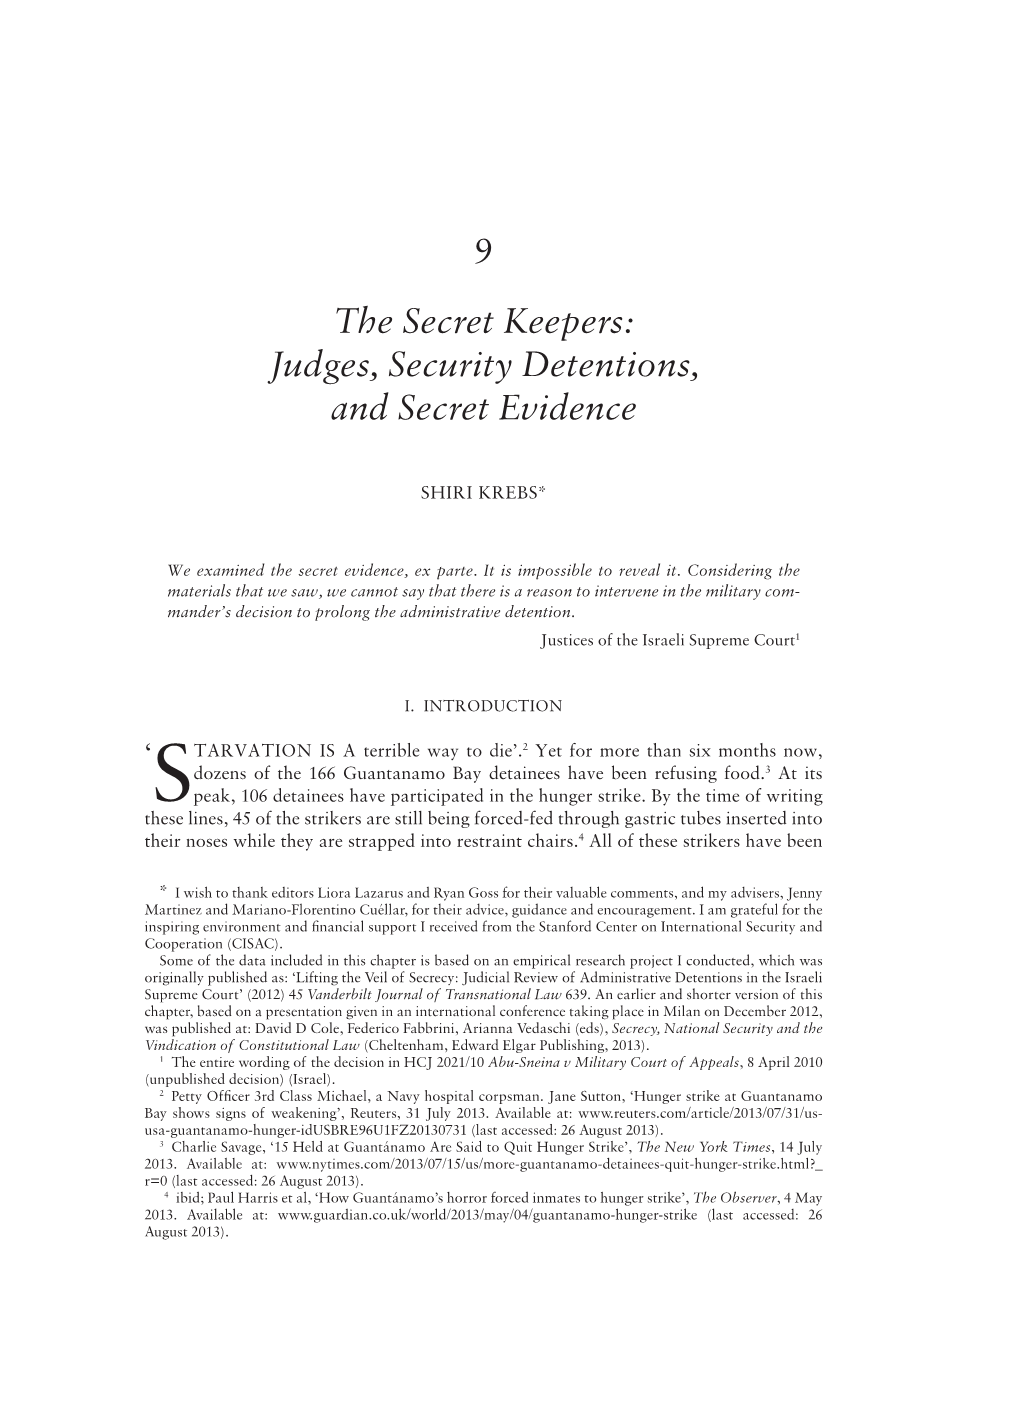 Judges, Security Detentions, and Secret Evidence